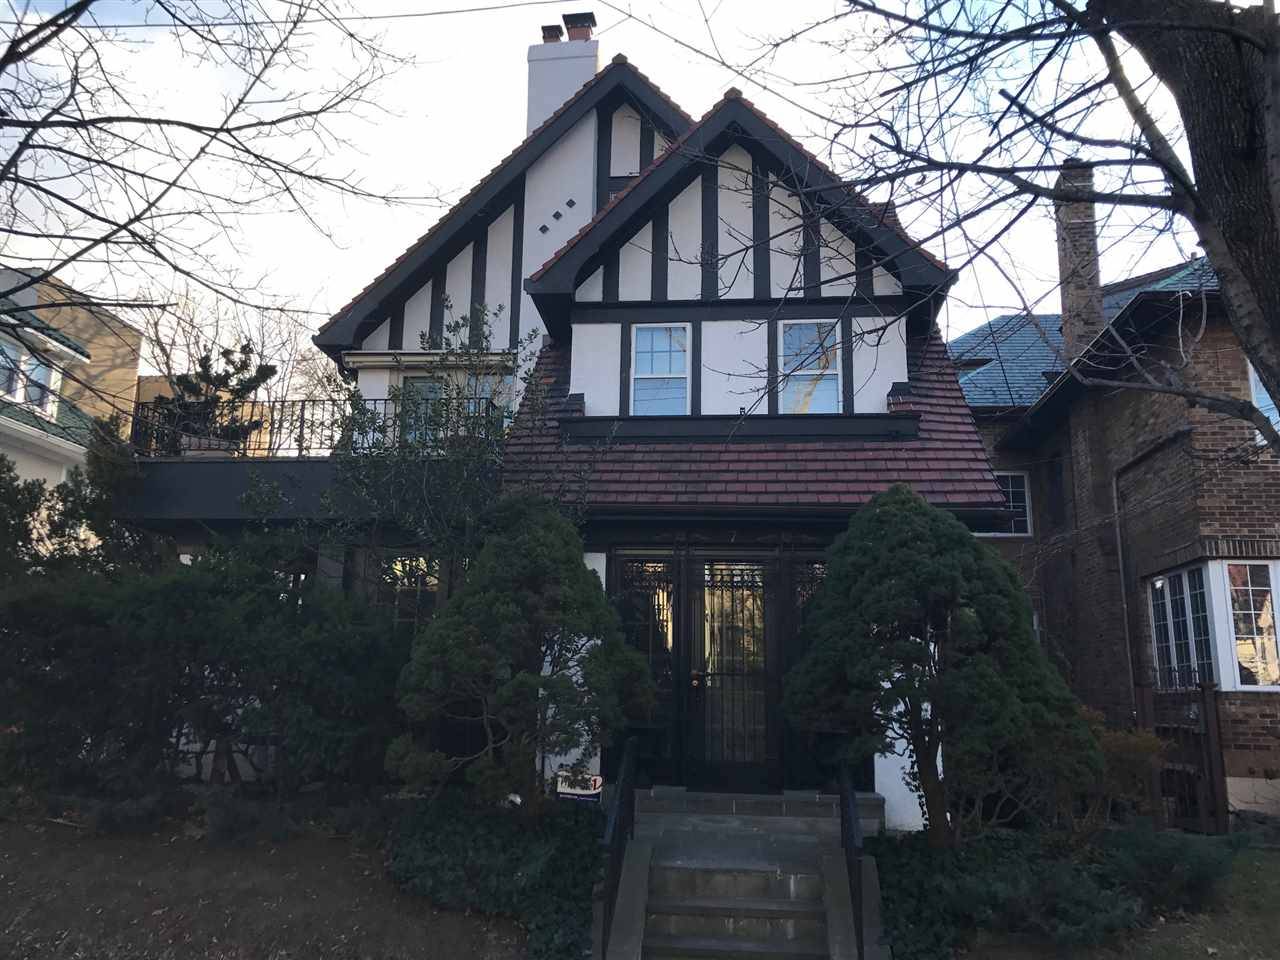 One of a kind Tudor home - 7 BR New Jersey